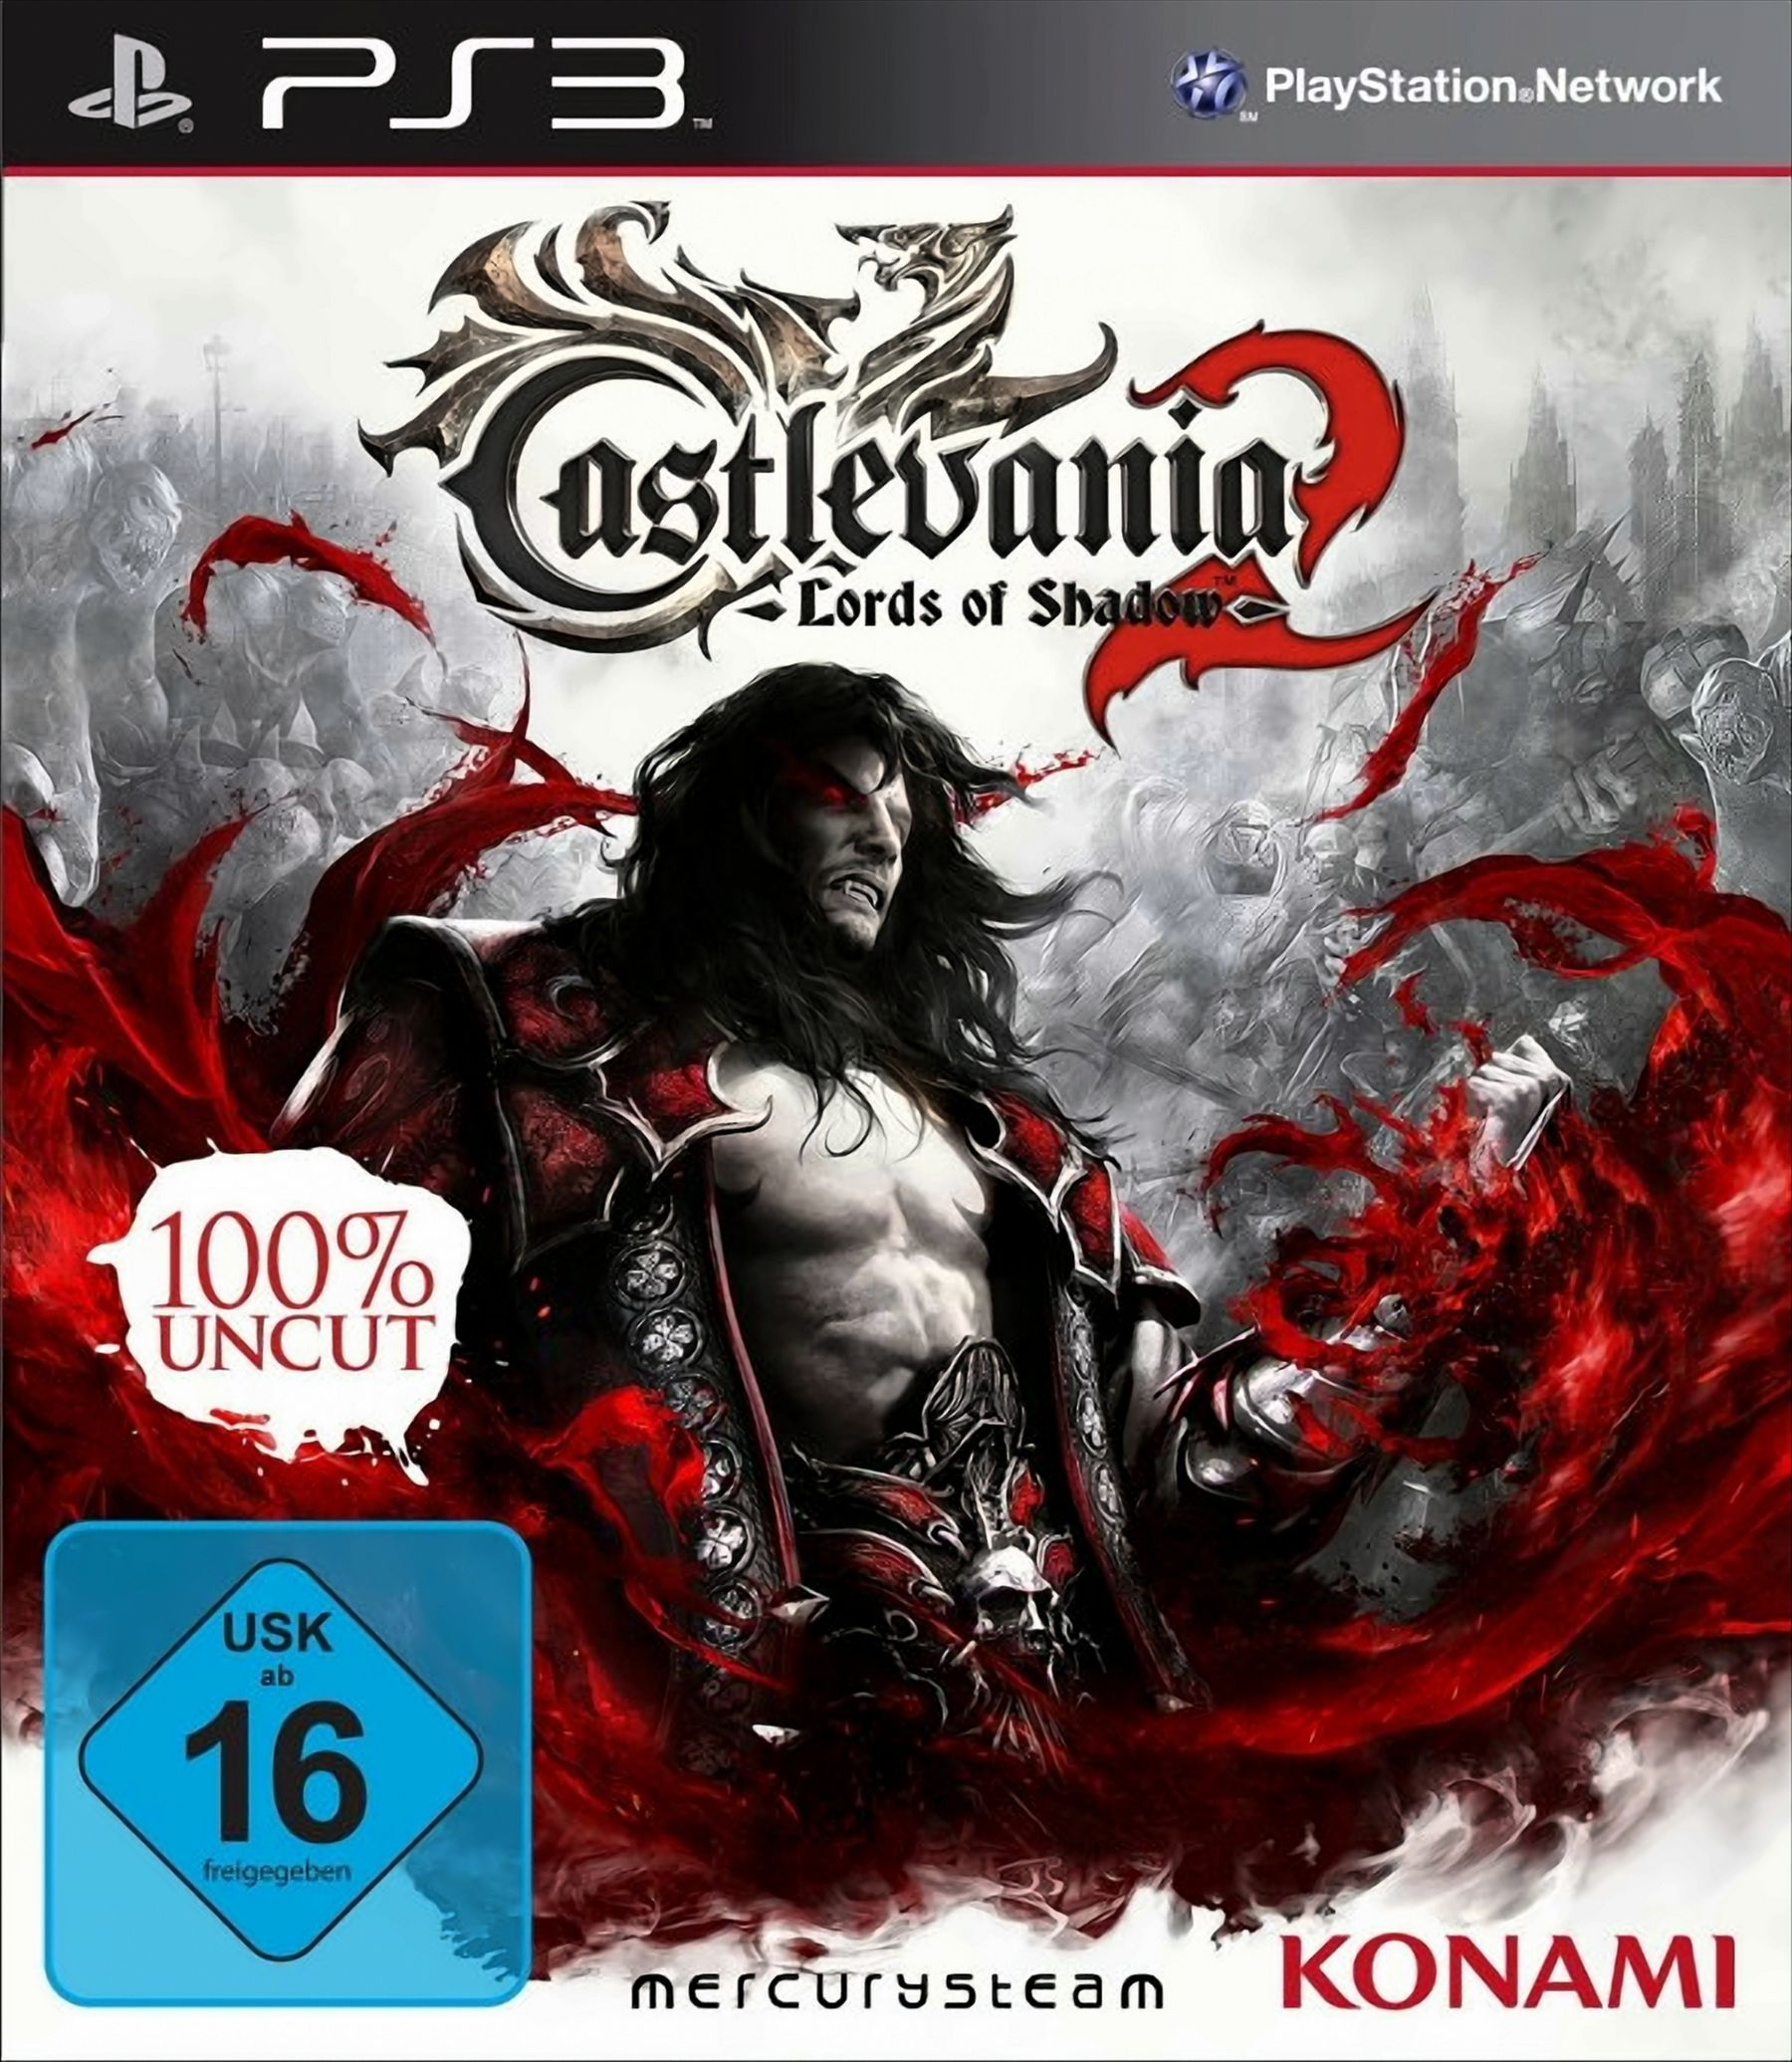 Castlevania: Lords Of 2 Shadow - 3] [PlayStation